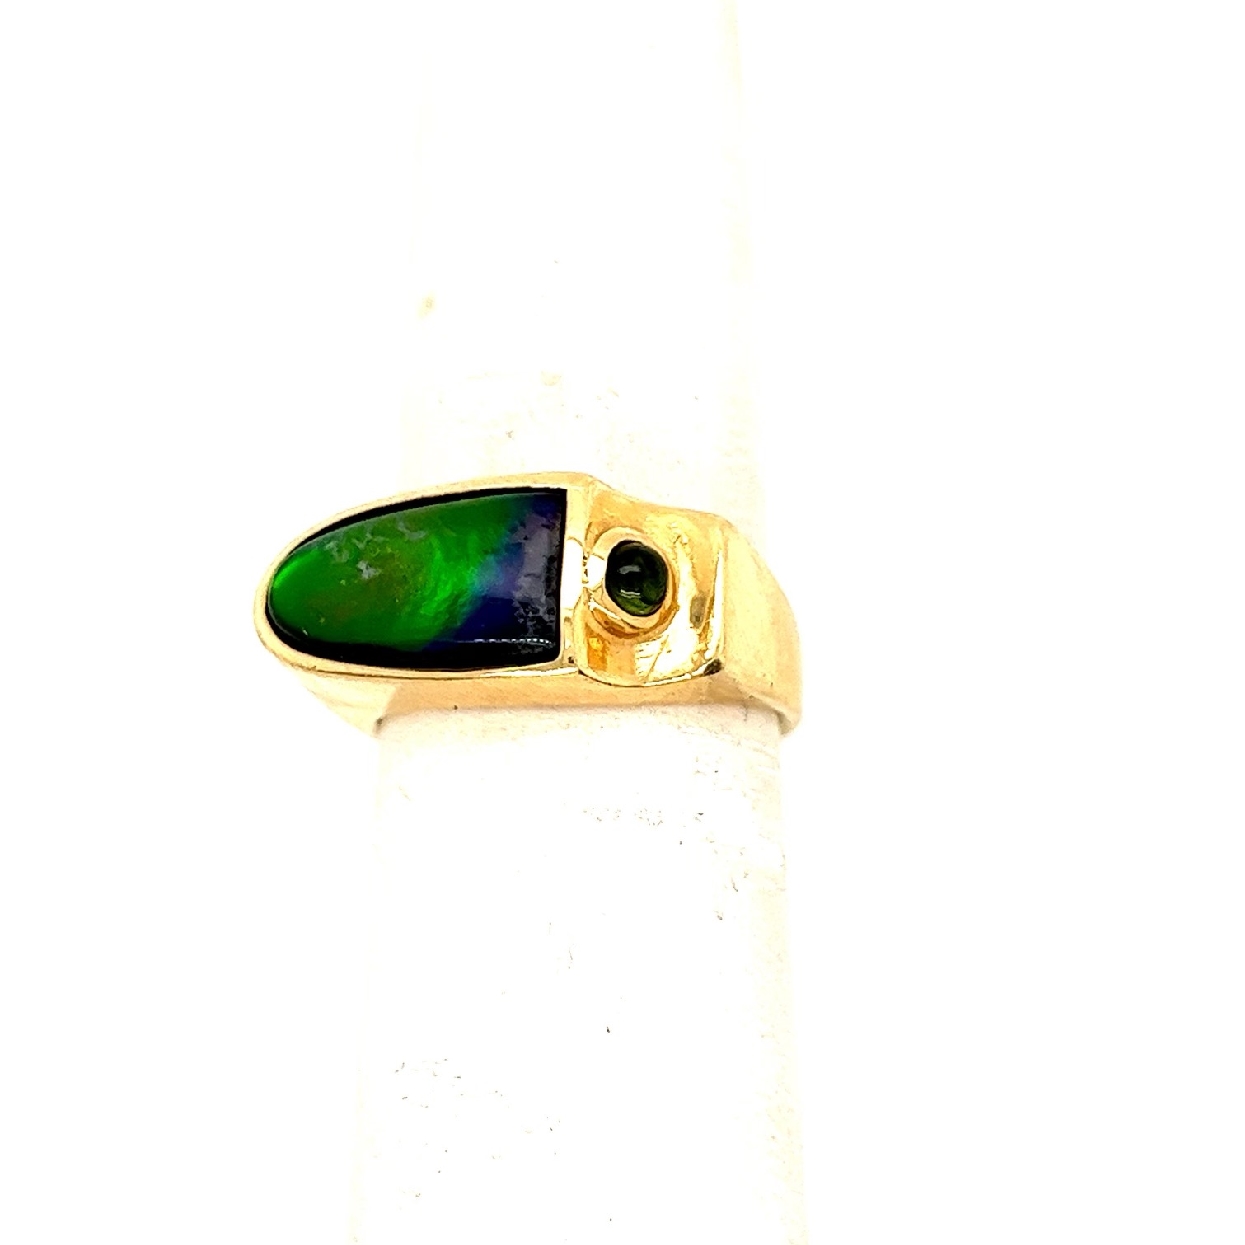 14K Yellow Gold Abstract Signet Ring with Ammolite Doublet with Green Chrome Tourmaline Cabochon Accent 

Size 7 